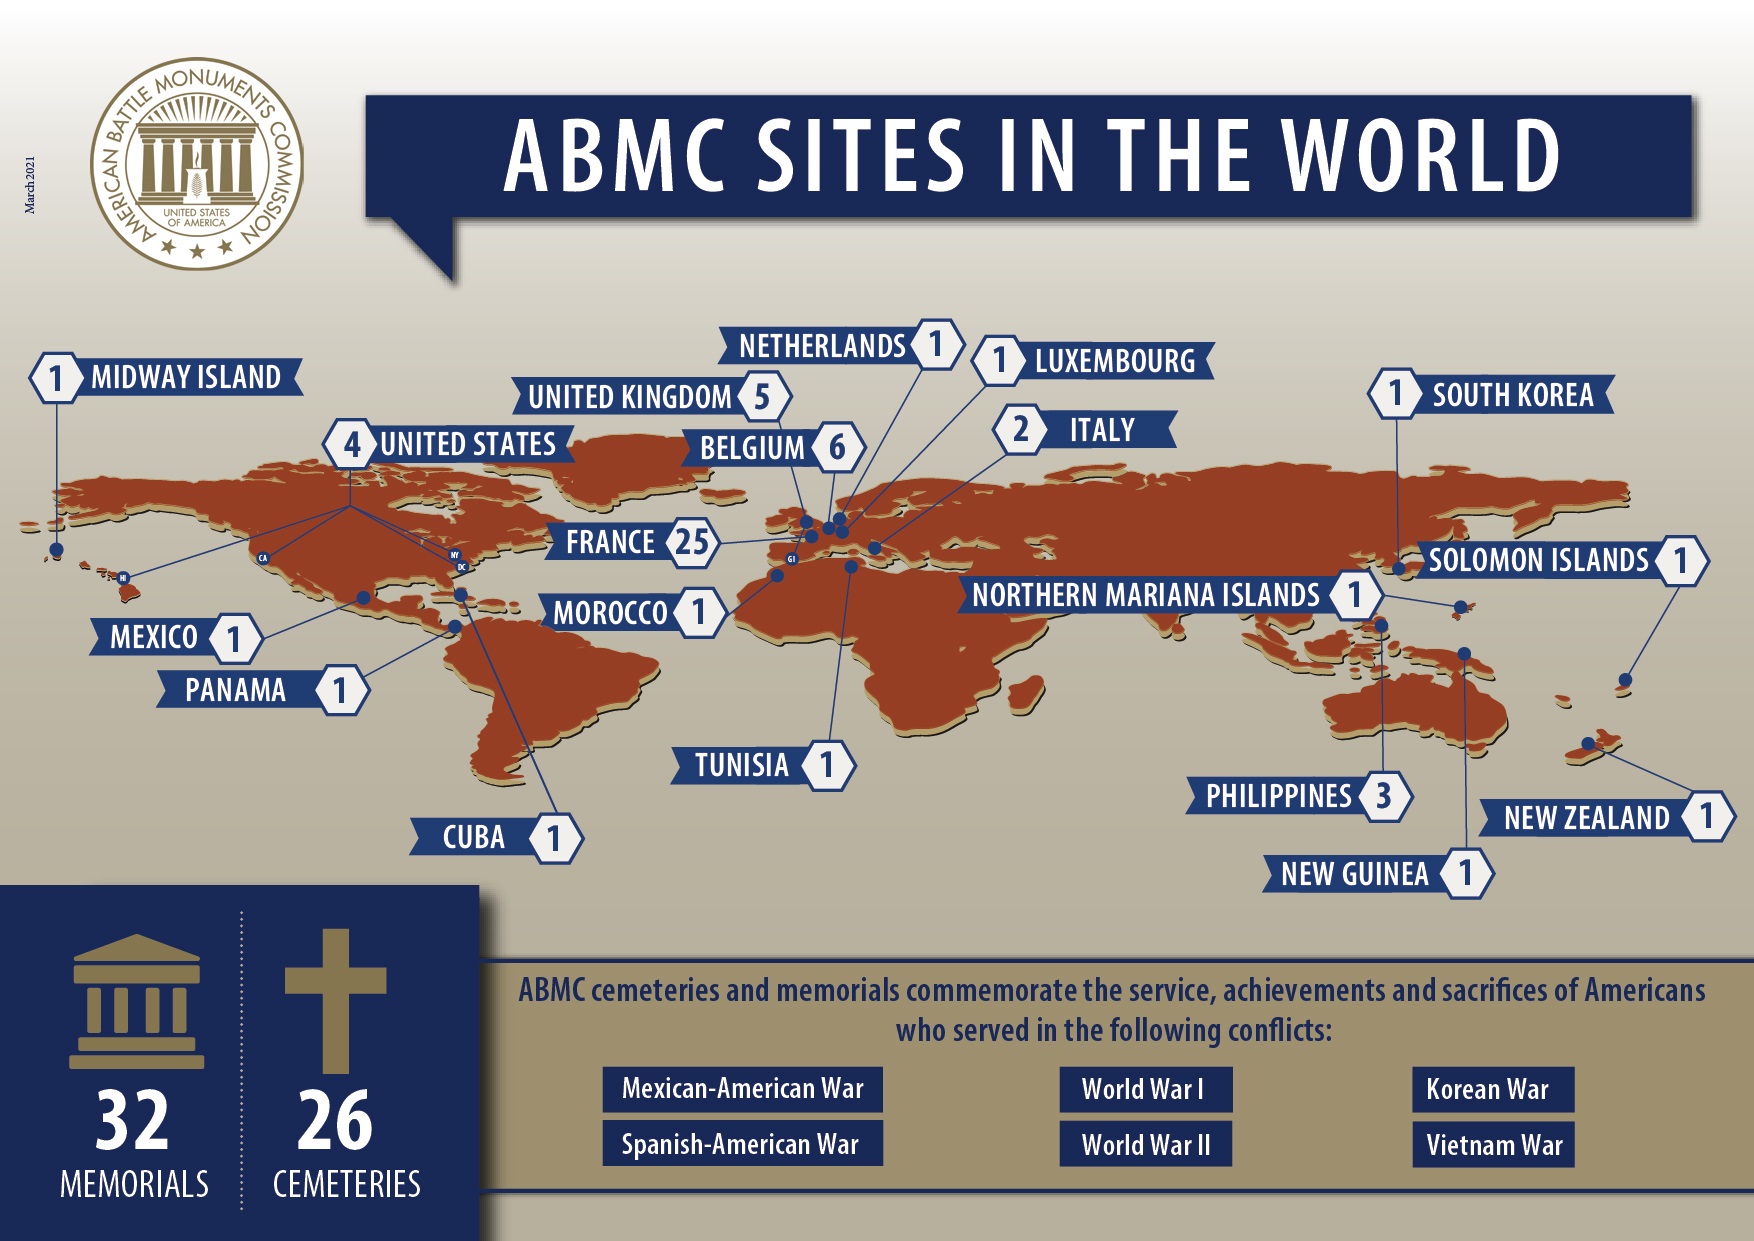 ABMC Sites in the World (Infographic 2021)